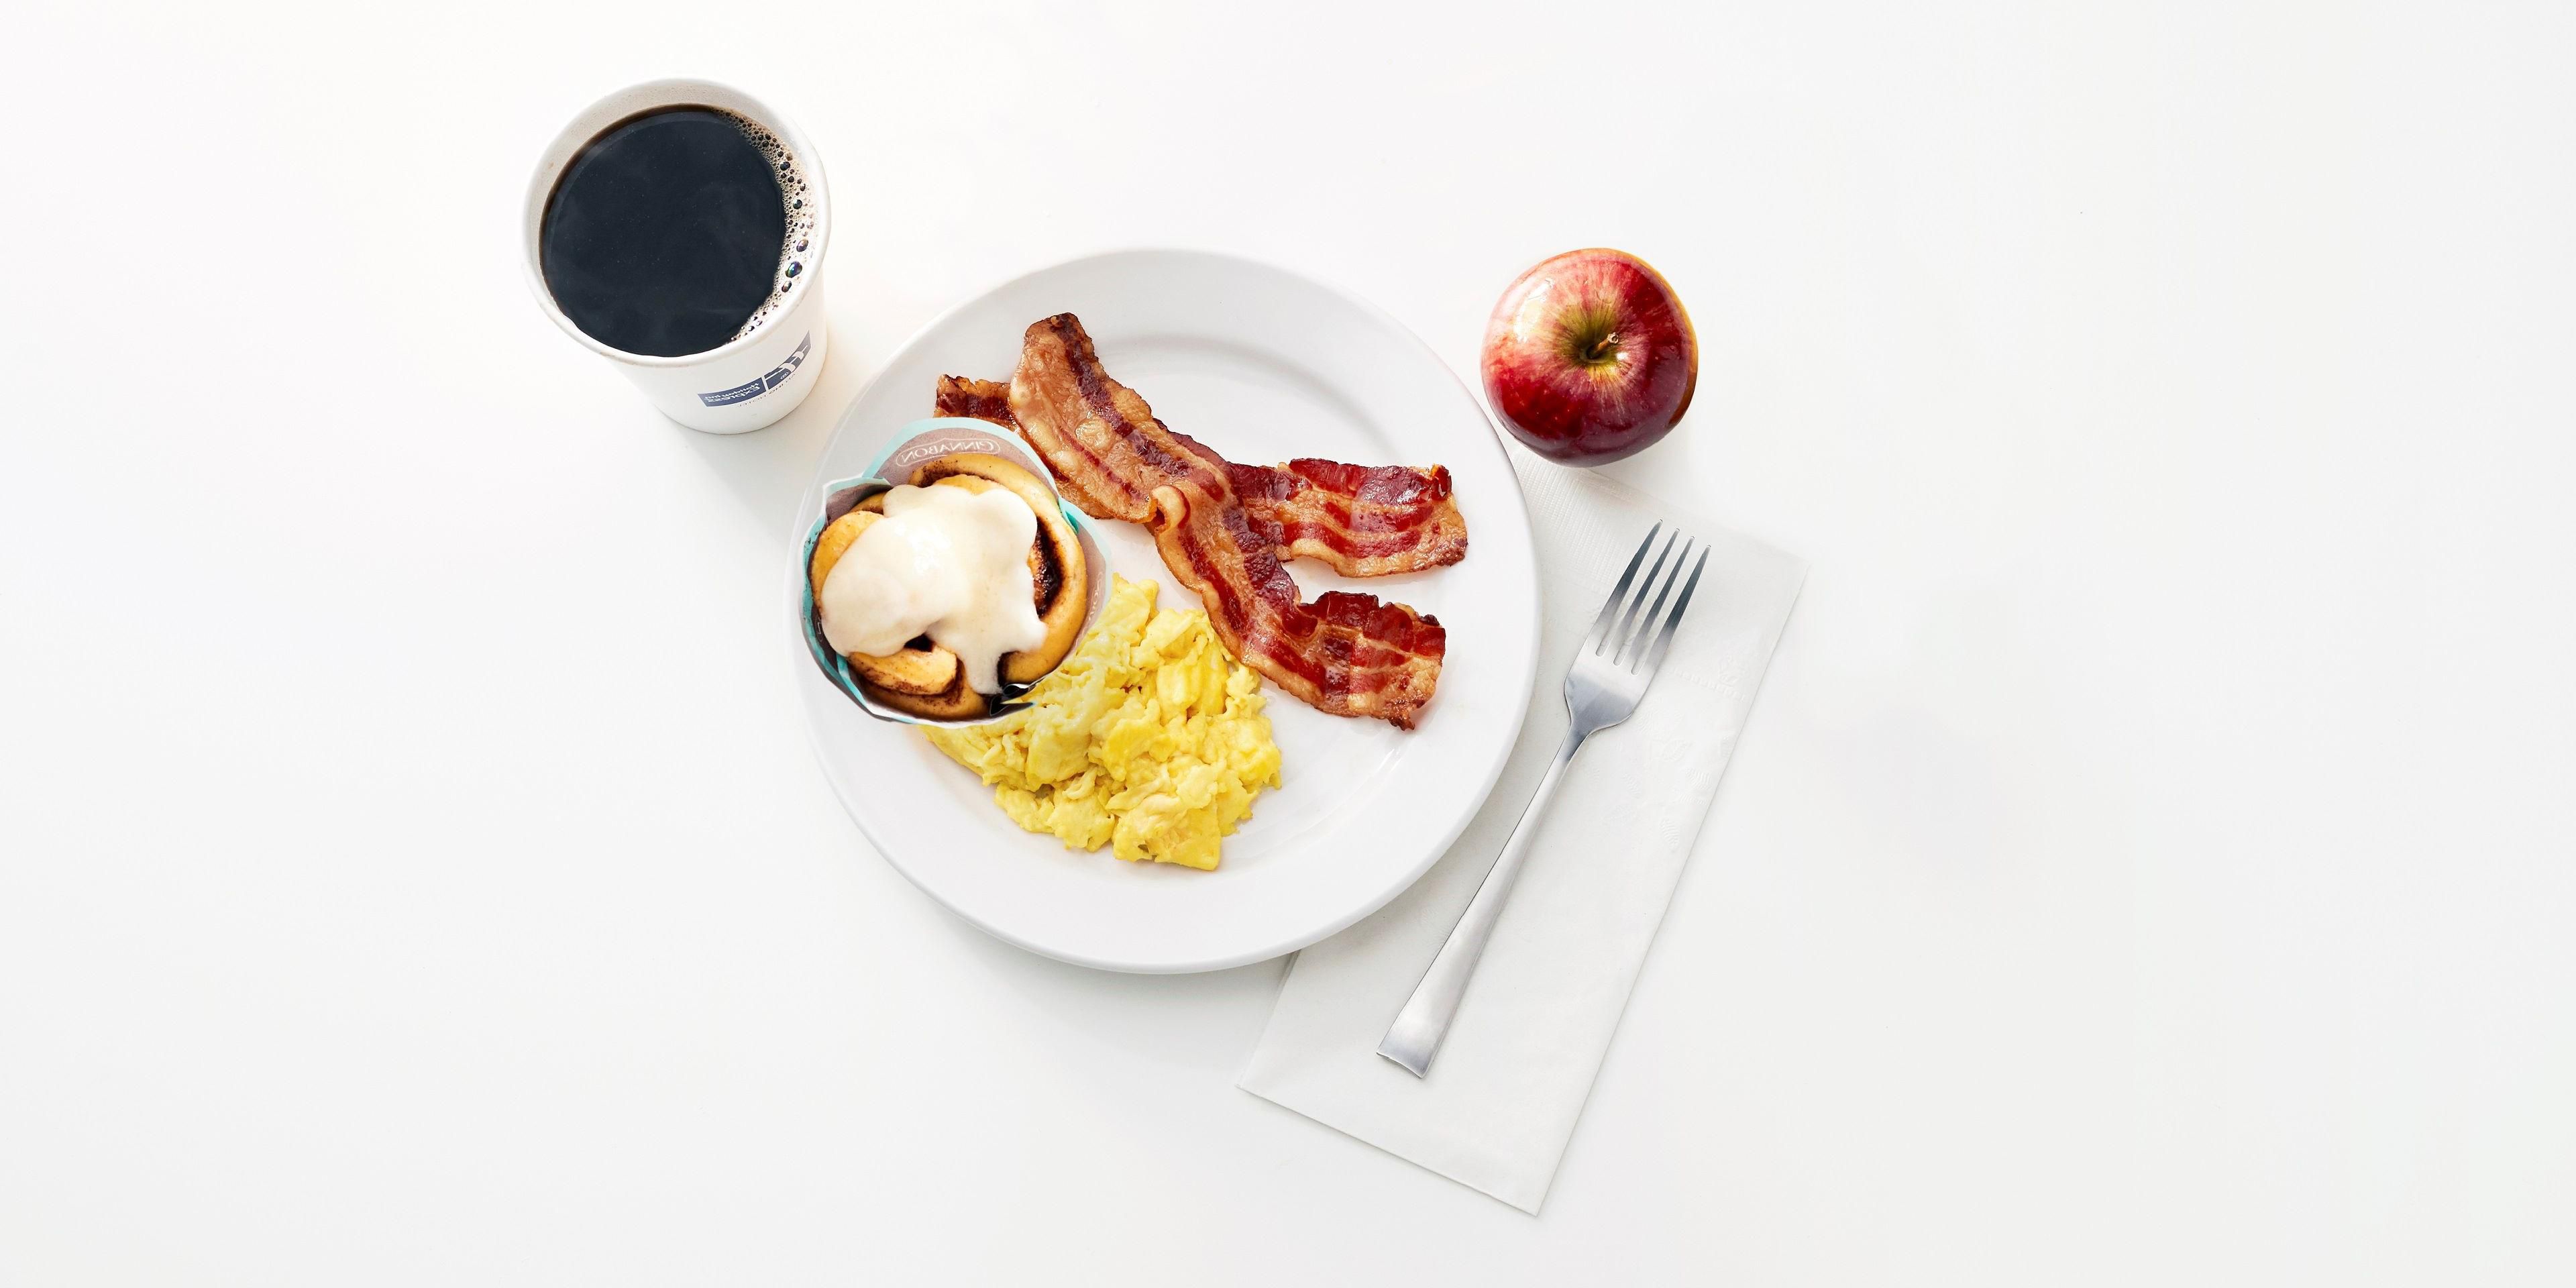 Kick start your day with our free Express Start Breakfast, with grab ‘n’ go options and favorites such as eggs and bacon, hot pancakes, our signature cinnamon rolls and fresh coffee. Offered from 6:00 AM – 9:00 AM.